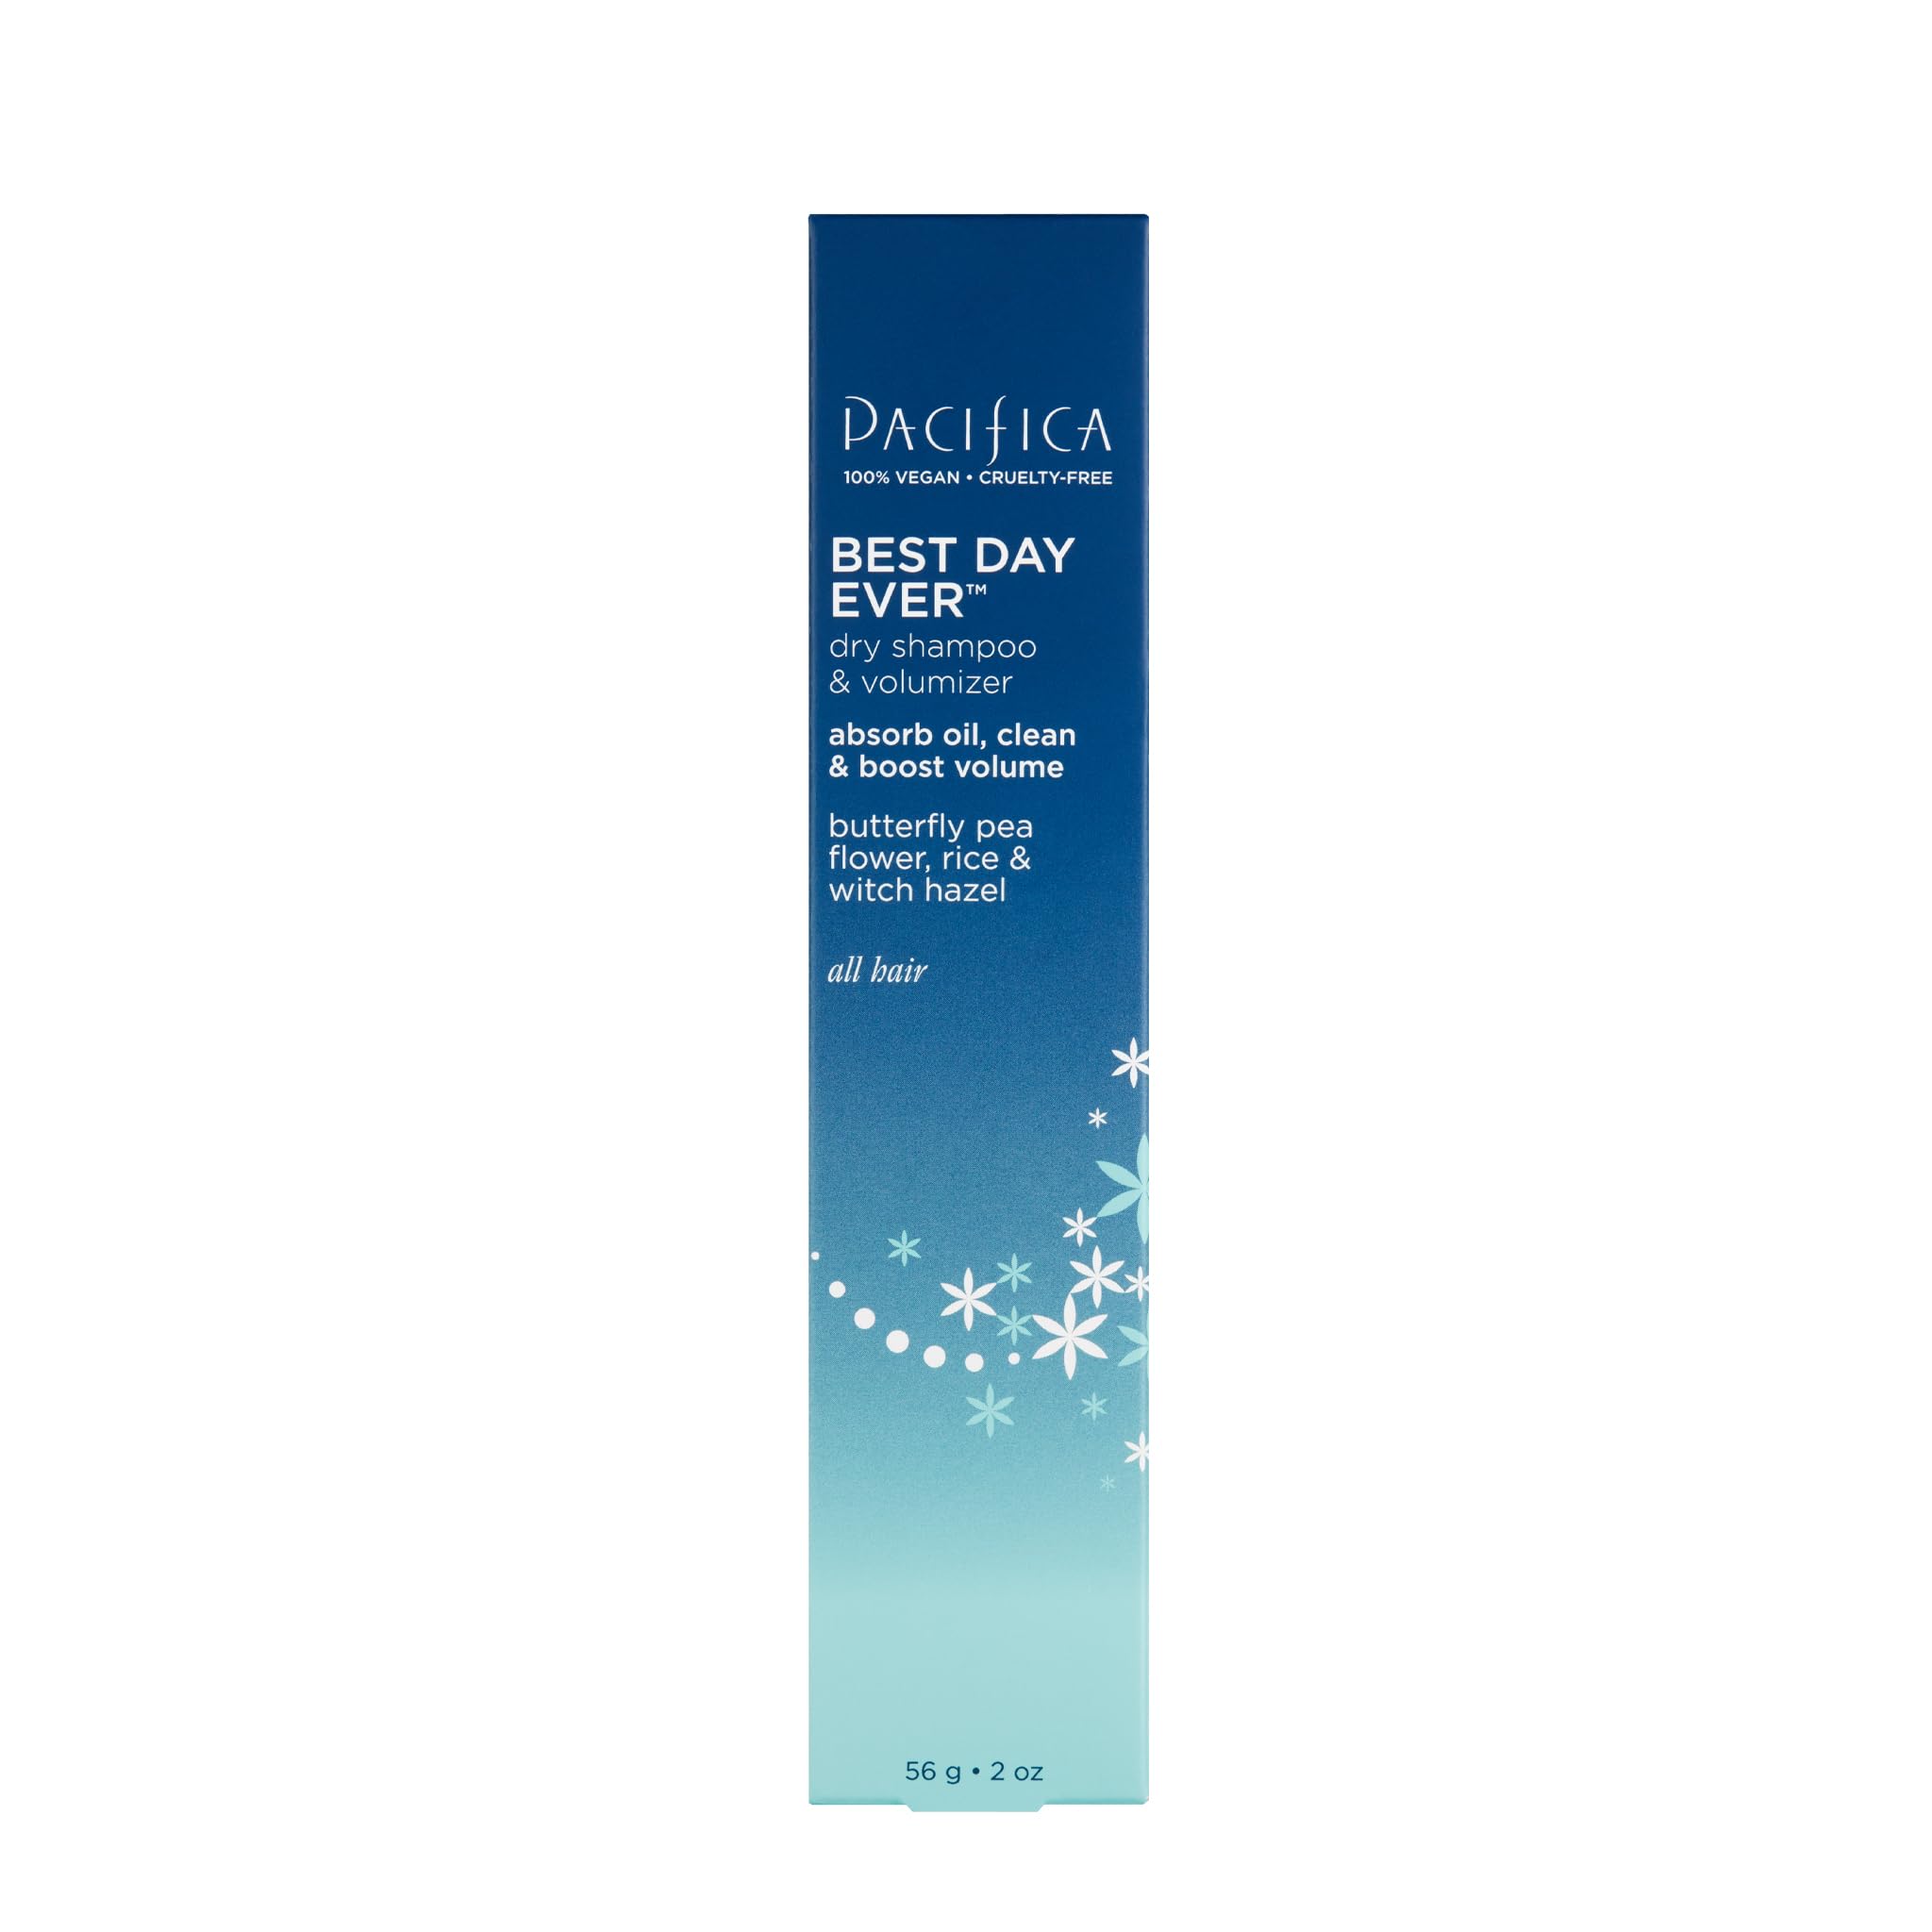 Pacifica Beauty, Best Day Ever Dry Shampoo Powder, Talc-Free, Benzene Free, Boosts Volume, Soaks Up Excess Oil, 2 oz, Vegan